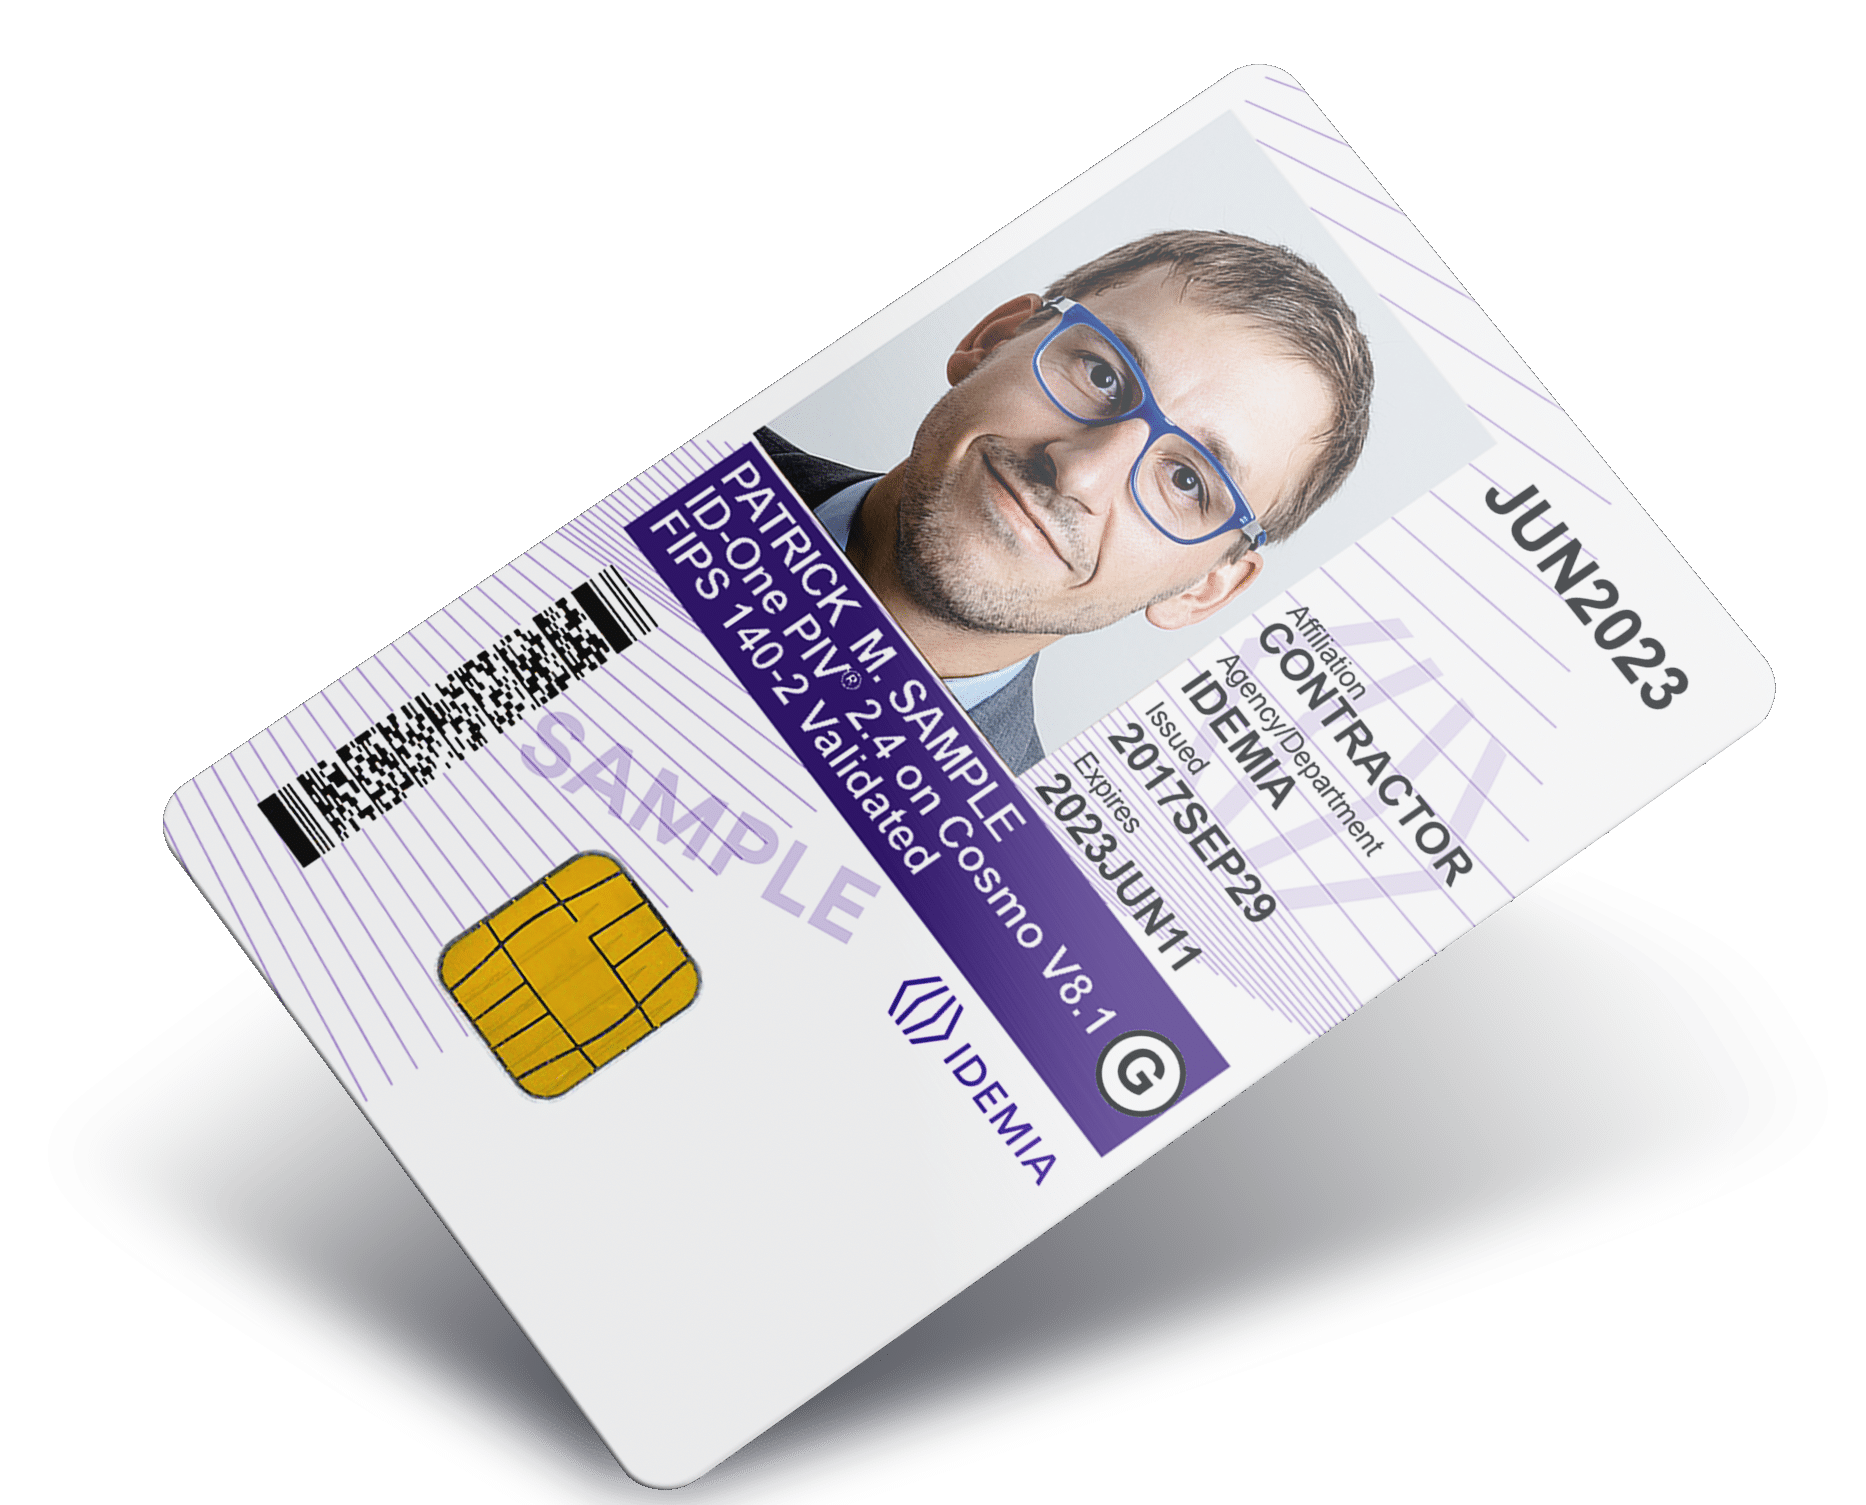 register new credential id with vip access